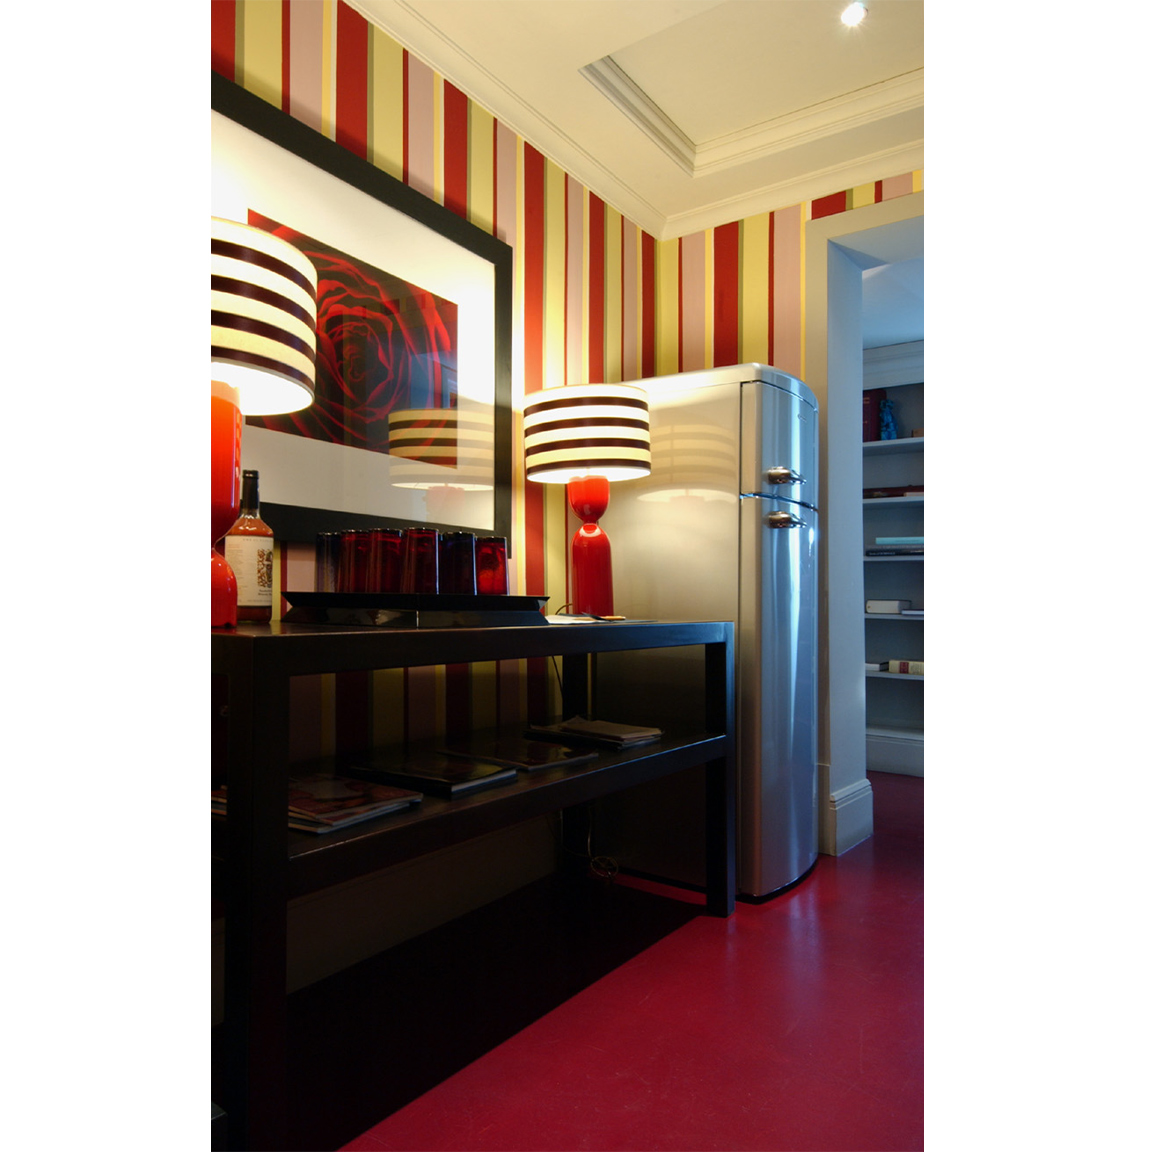 strong colors - red resin floor - striped painted wall